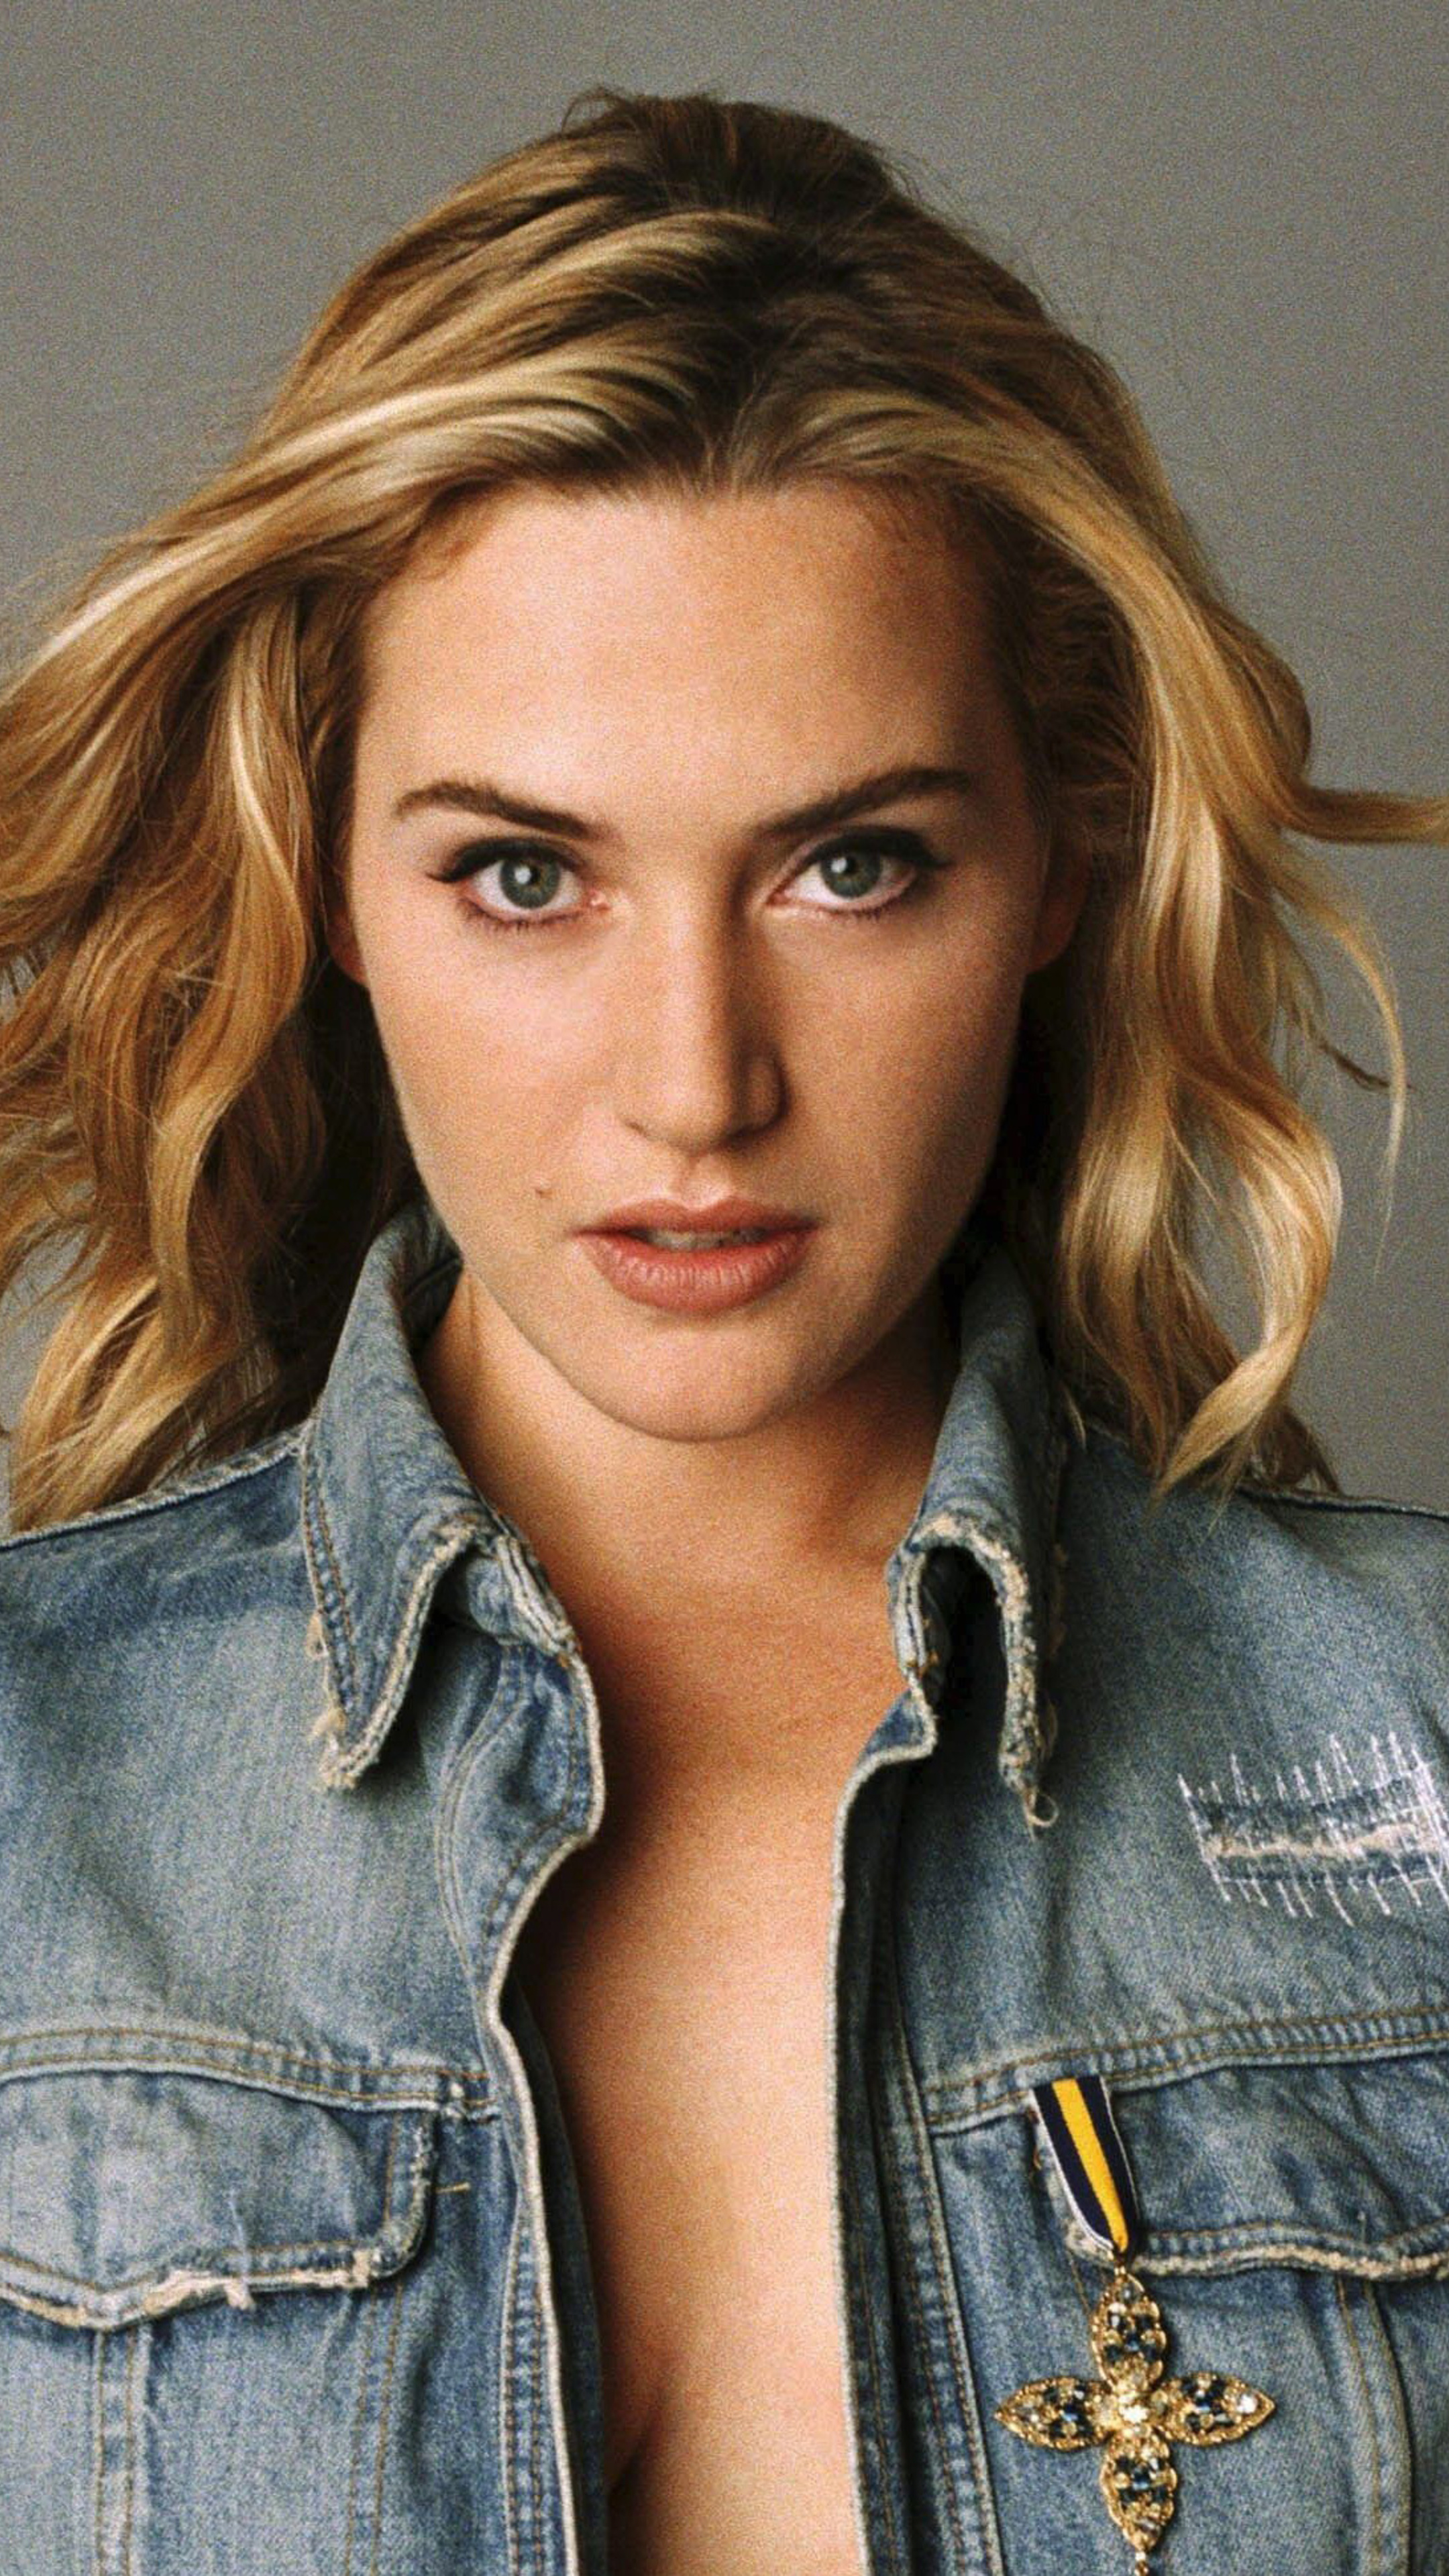 Kate Winslet, 2018 4K images, Premium HD wallpapers, Sony Xperia photos, 2160x3840 4K Handy